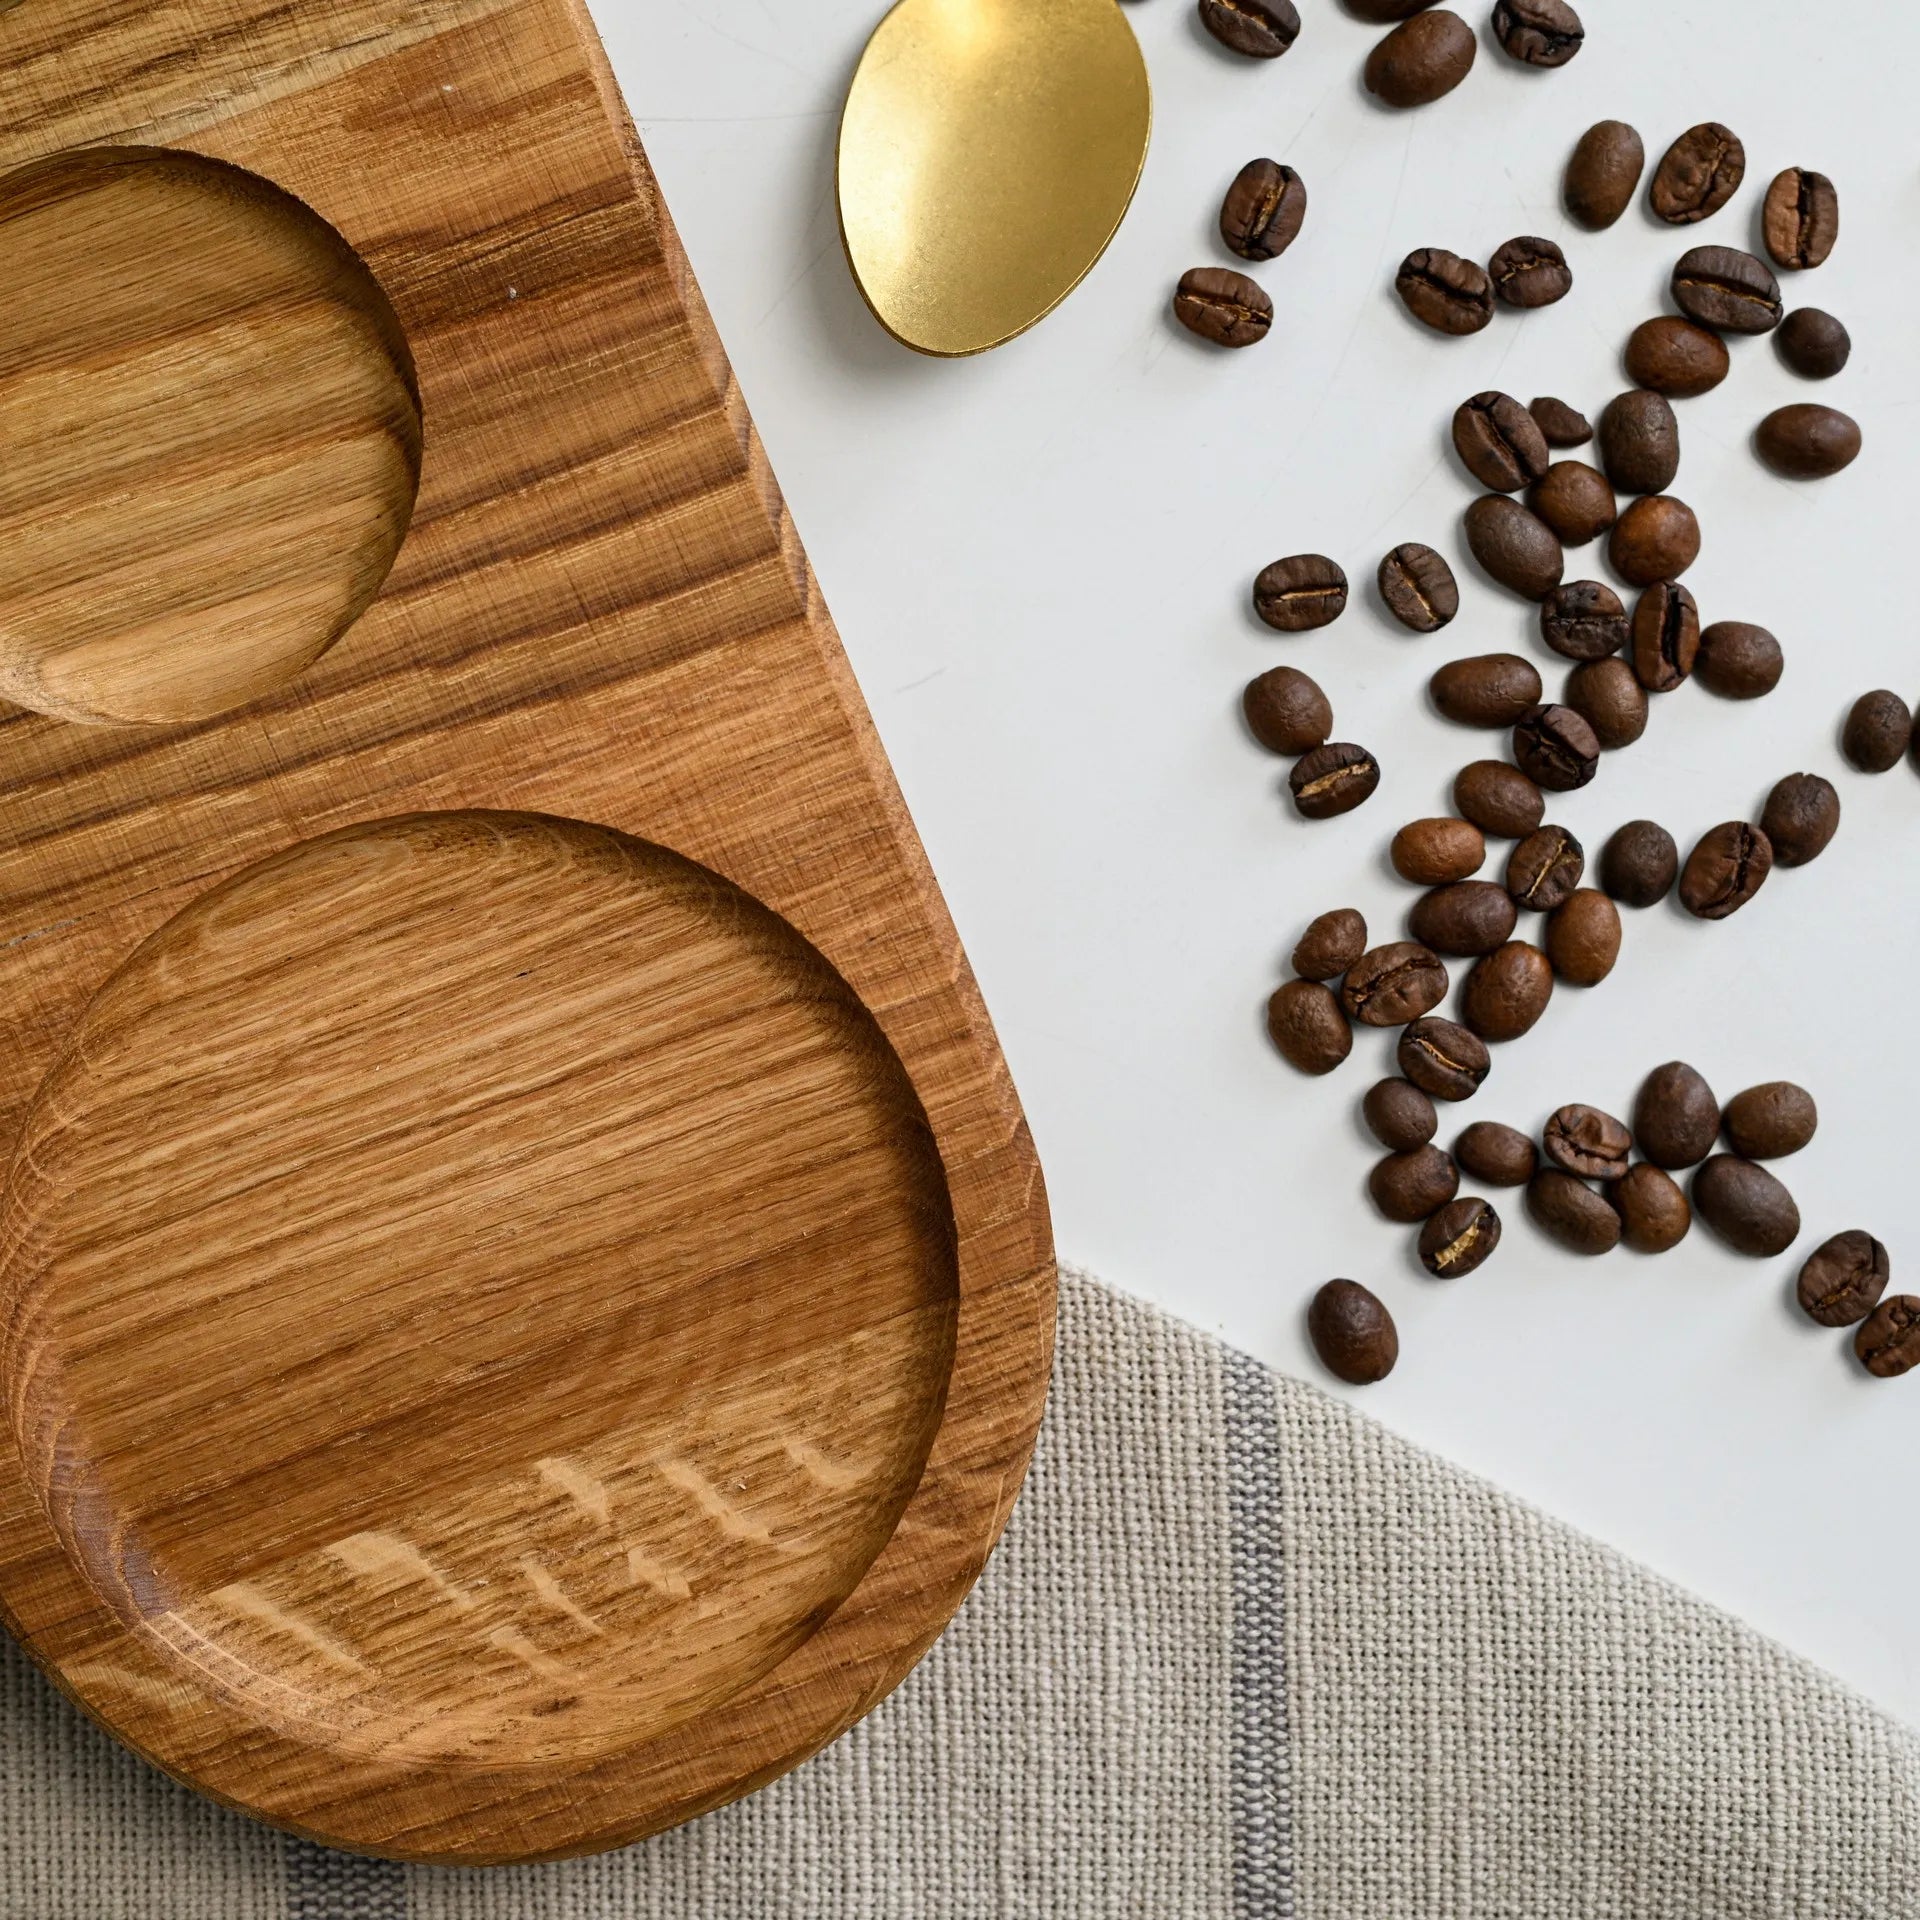 Wooden serving board, suitable for cafes and restaurants, offering a unique and stylish way to serve food.